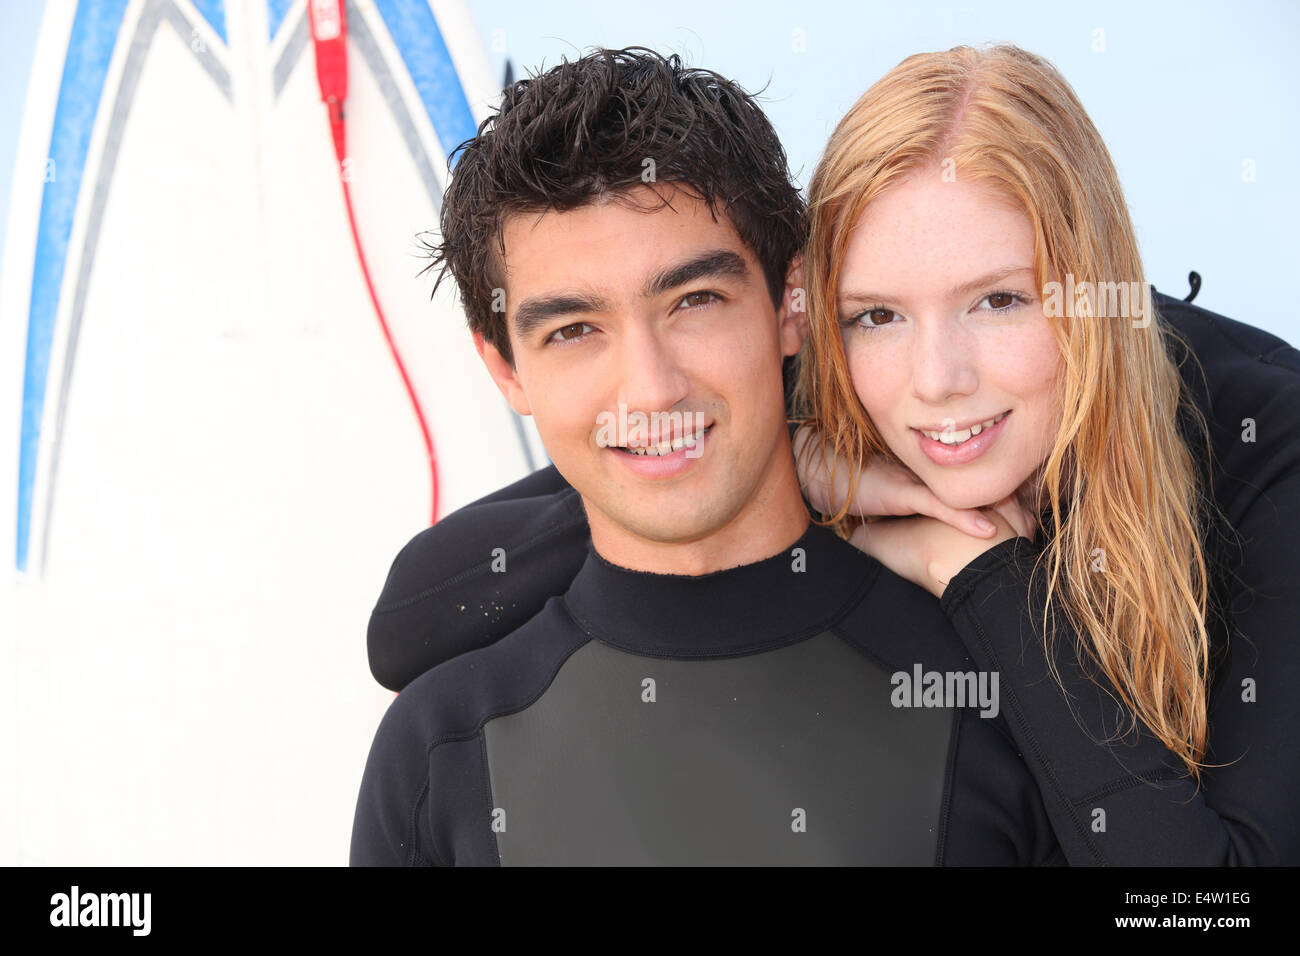 Two young surfers in wetsuits Stock Photo